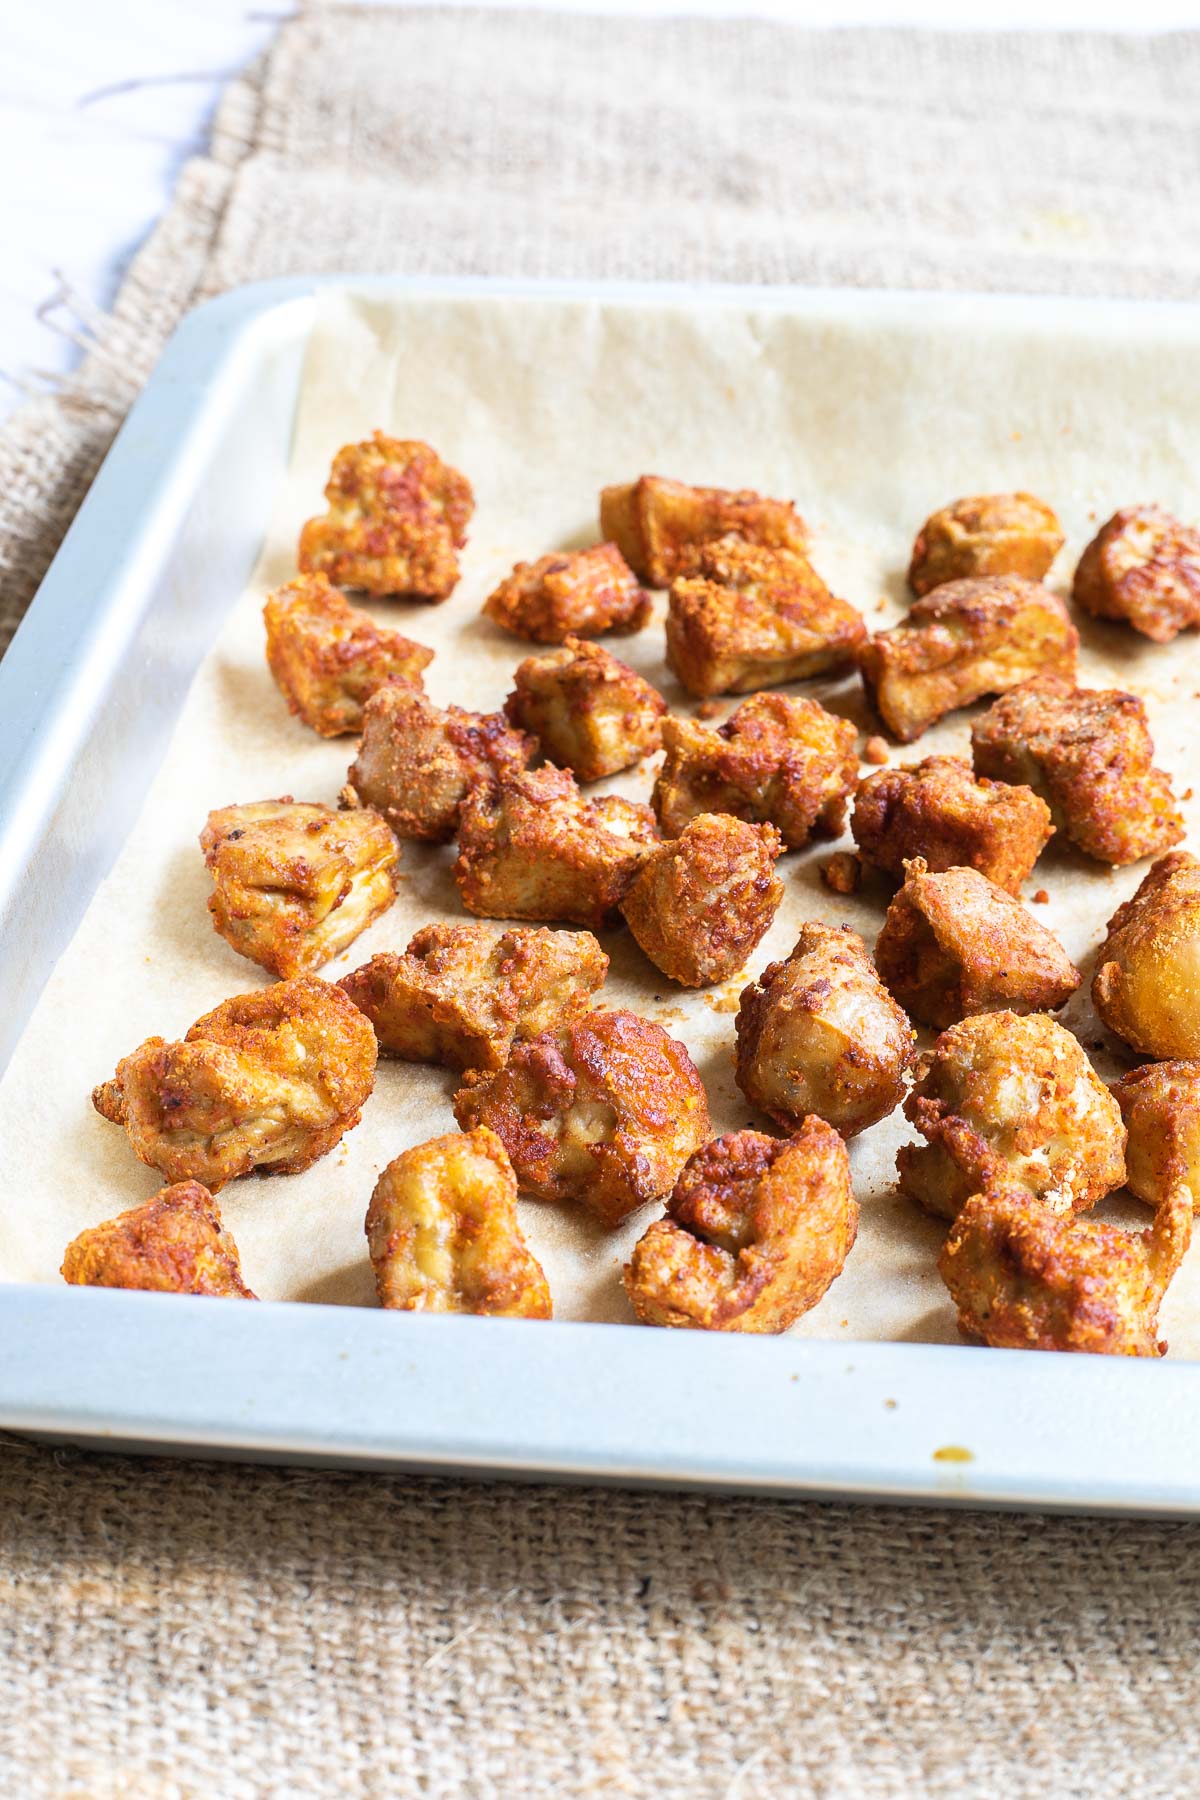 Baked, redish brown tofu pieces on a parchment paper in a silver baking tray.